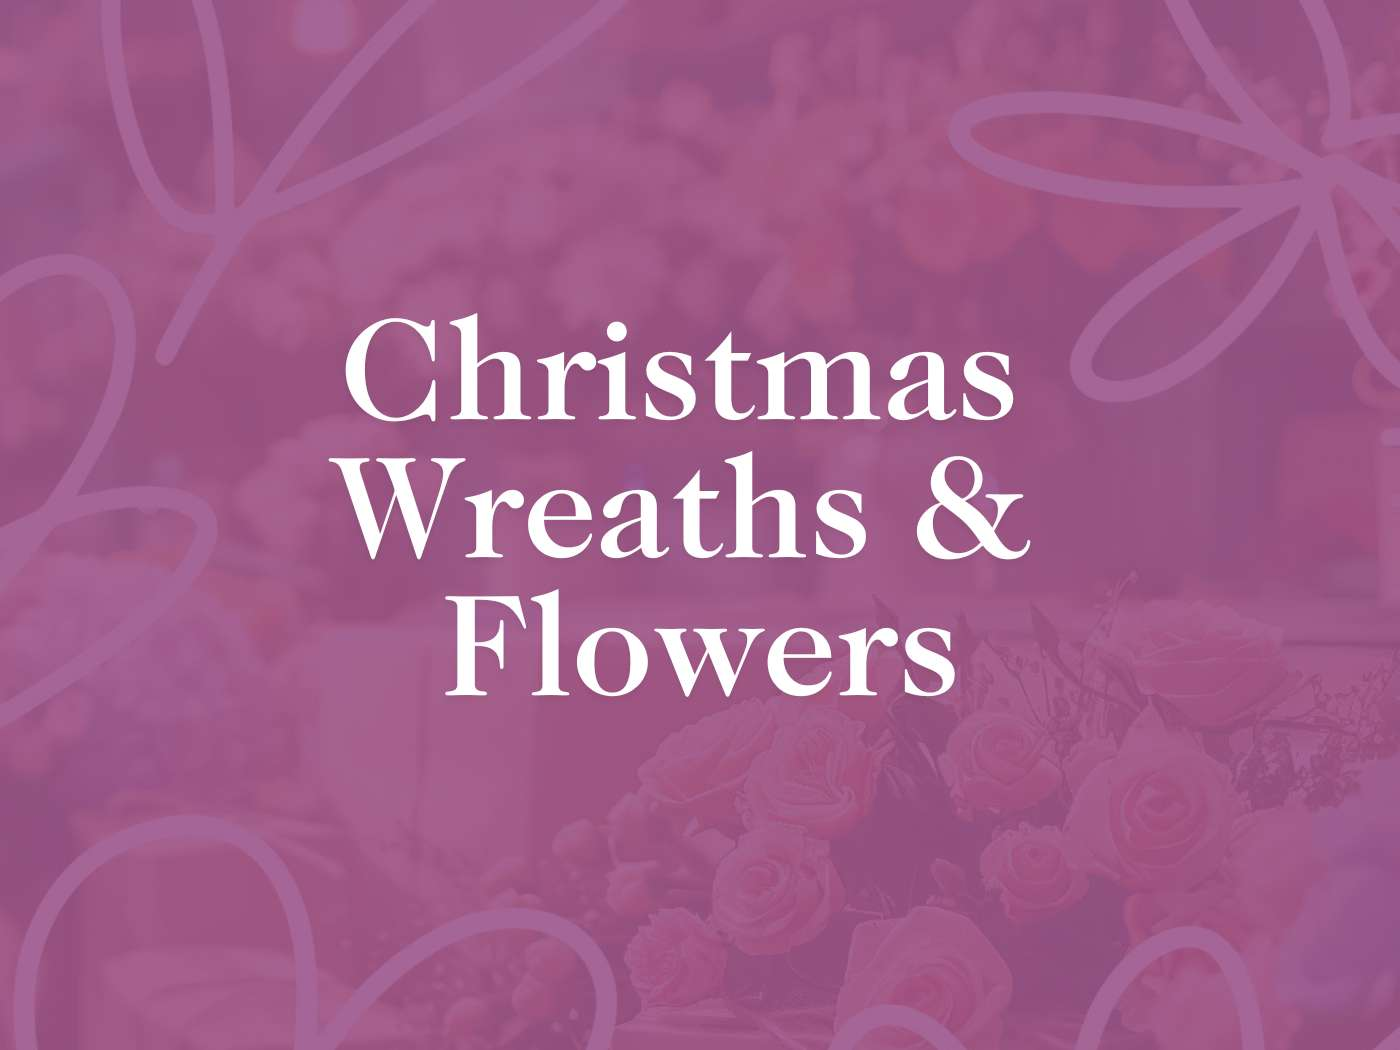 Alt text: "The text 'Christmas Wreaths & Flowers' overlaid on a soft-focus background of roses, conveying a range of festive floral arrangements for the holiday season, part of the exclusive collection at Fabulous Flowers and Gifts.